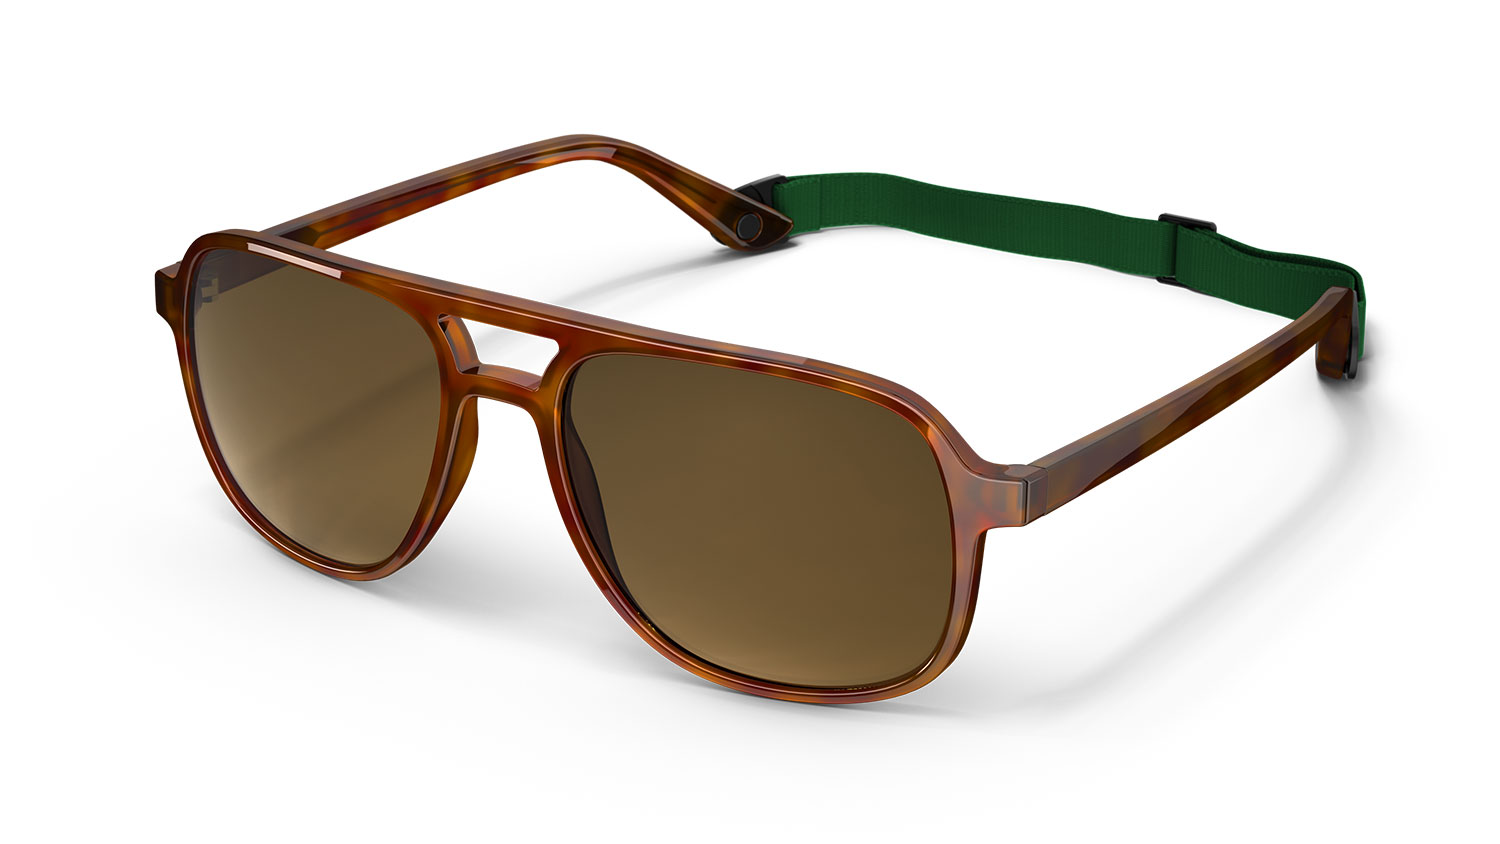 Howlin’: The sunglasses of choice for both sports and leisure